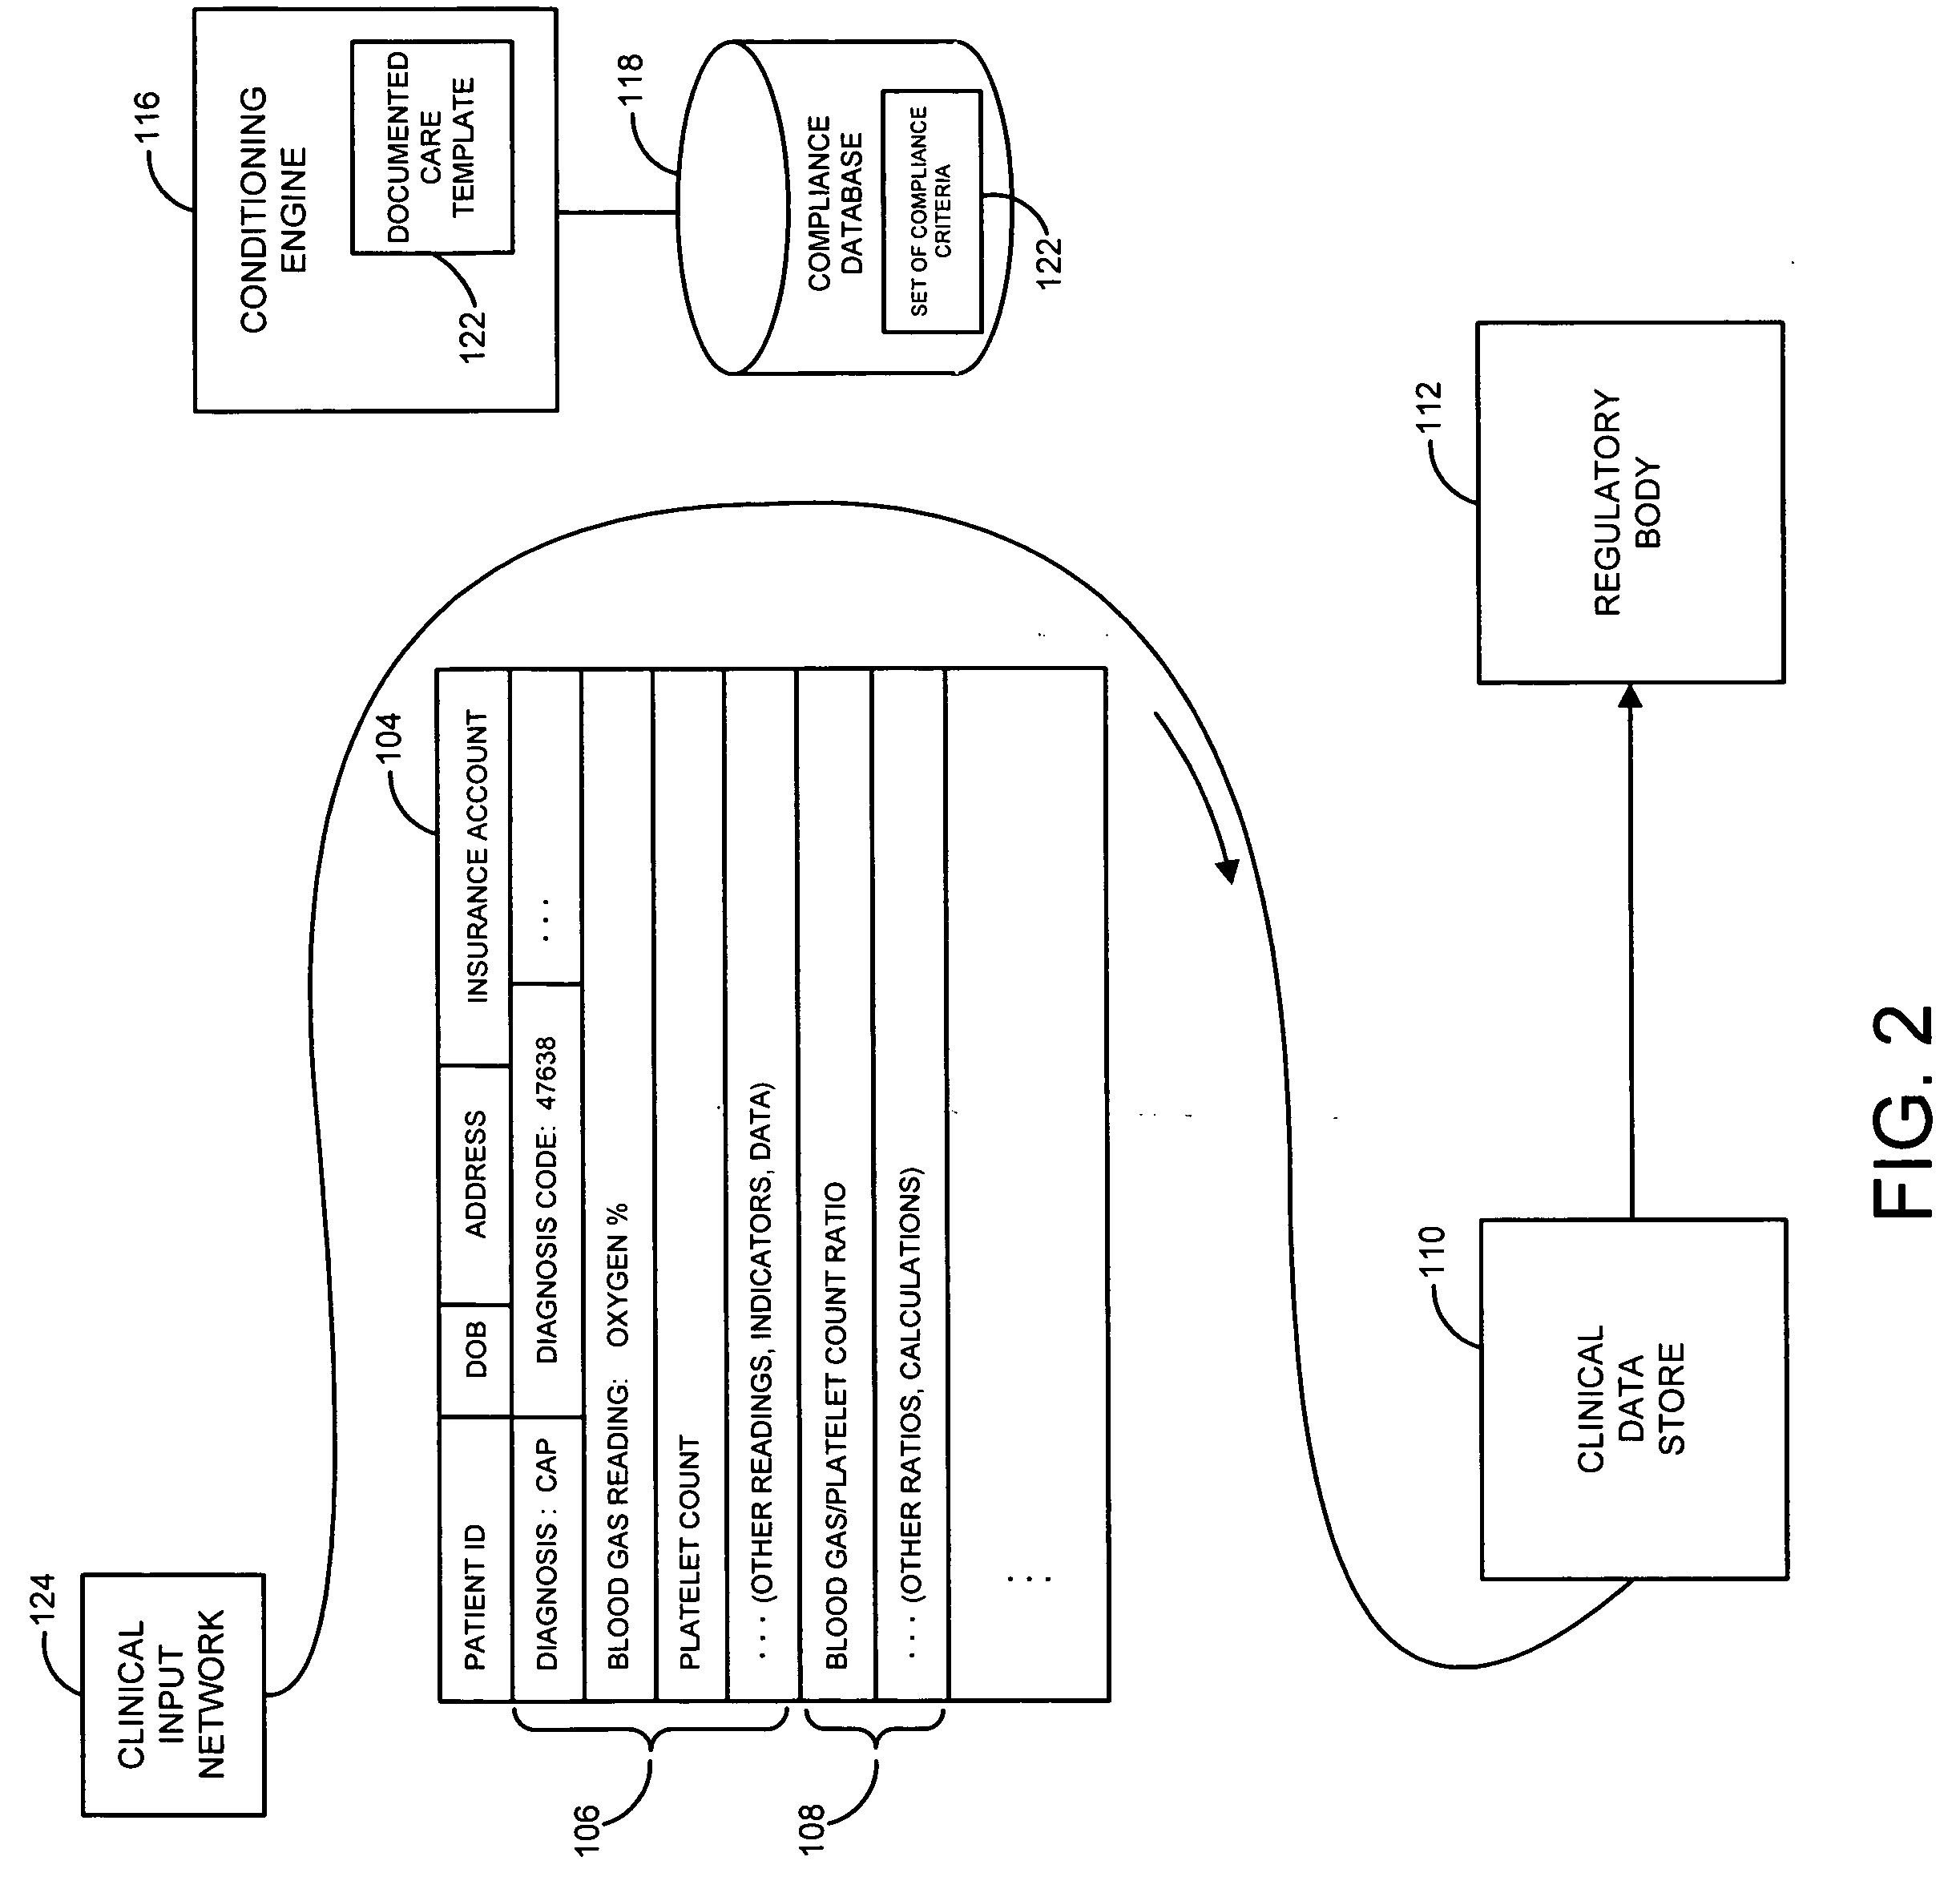 System and method for capture of qualified compliance data at point of clinical care